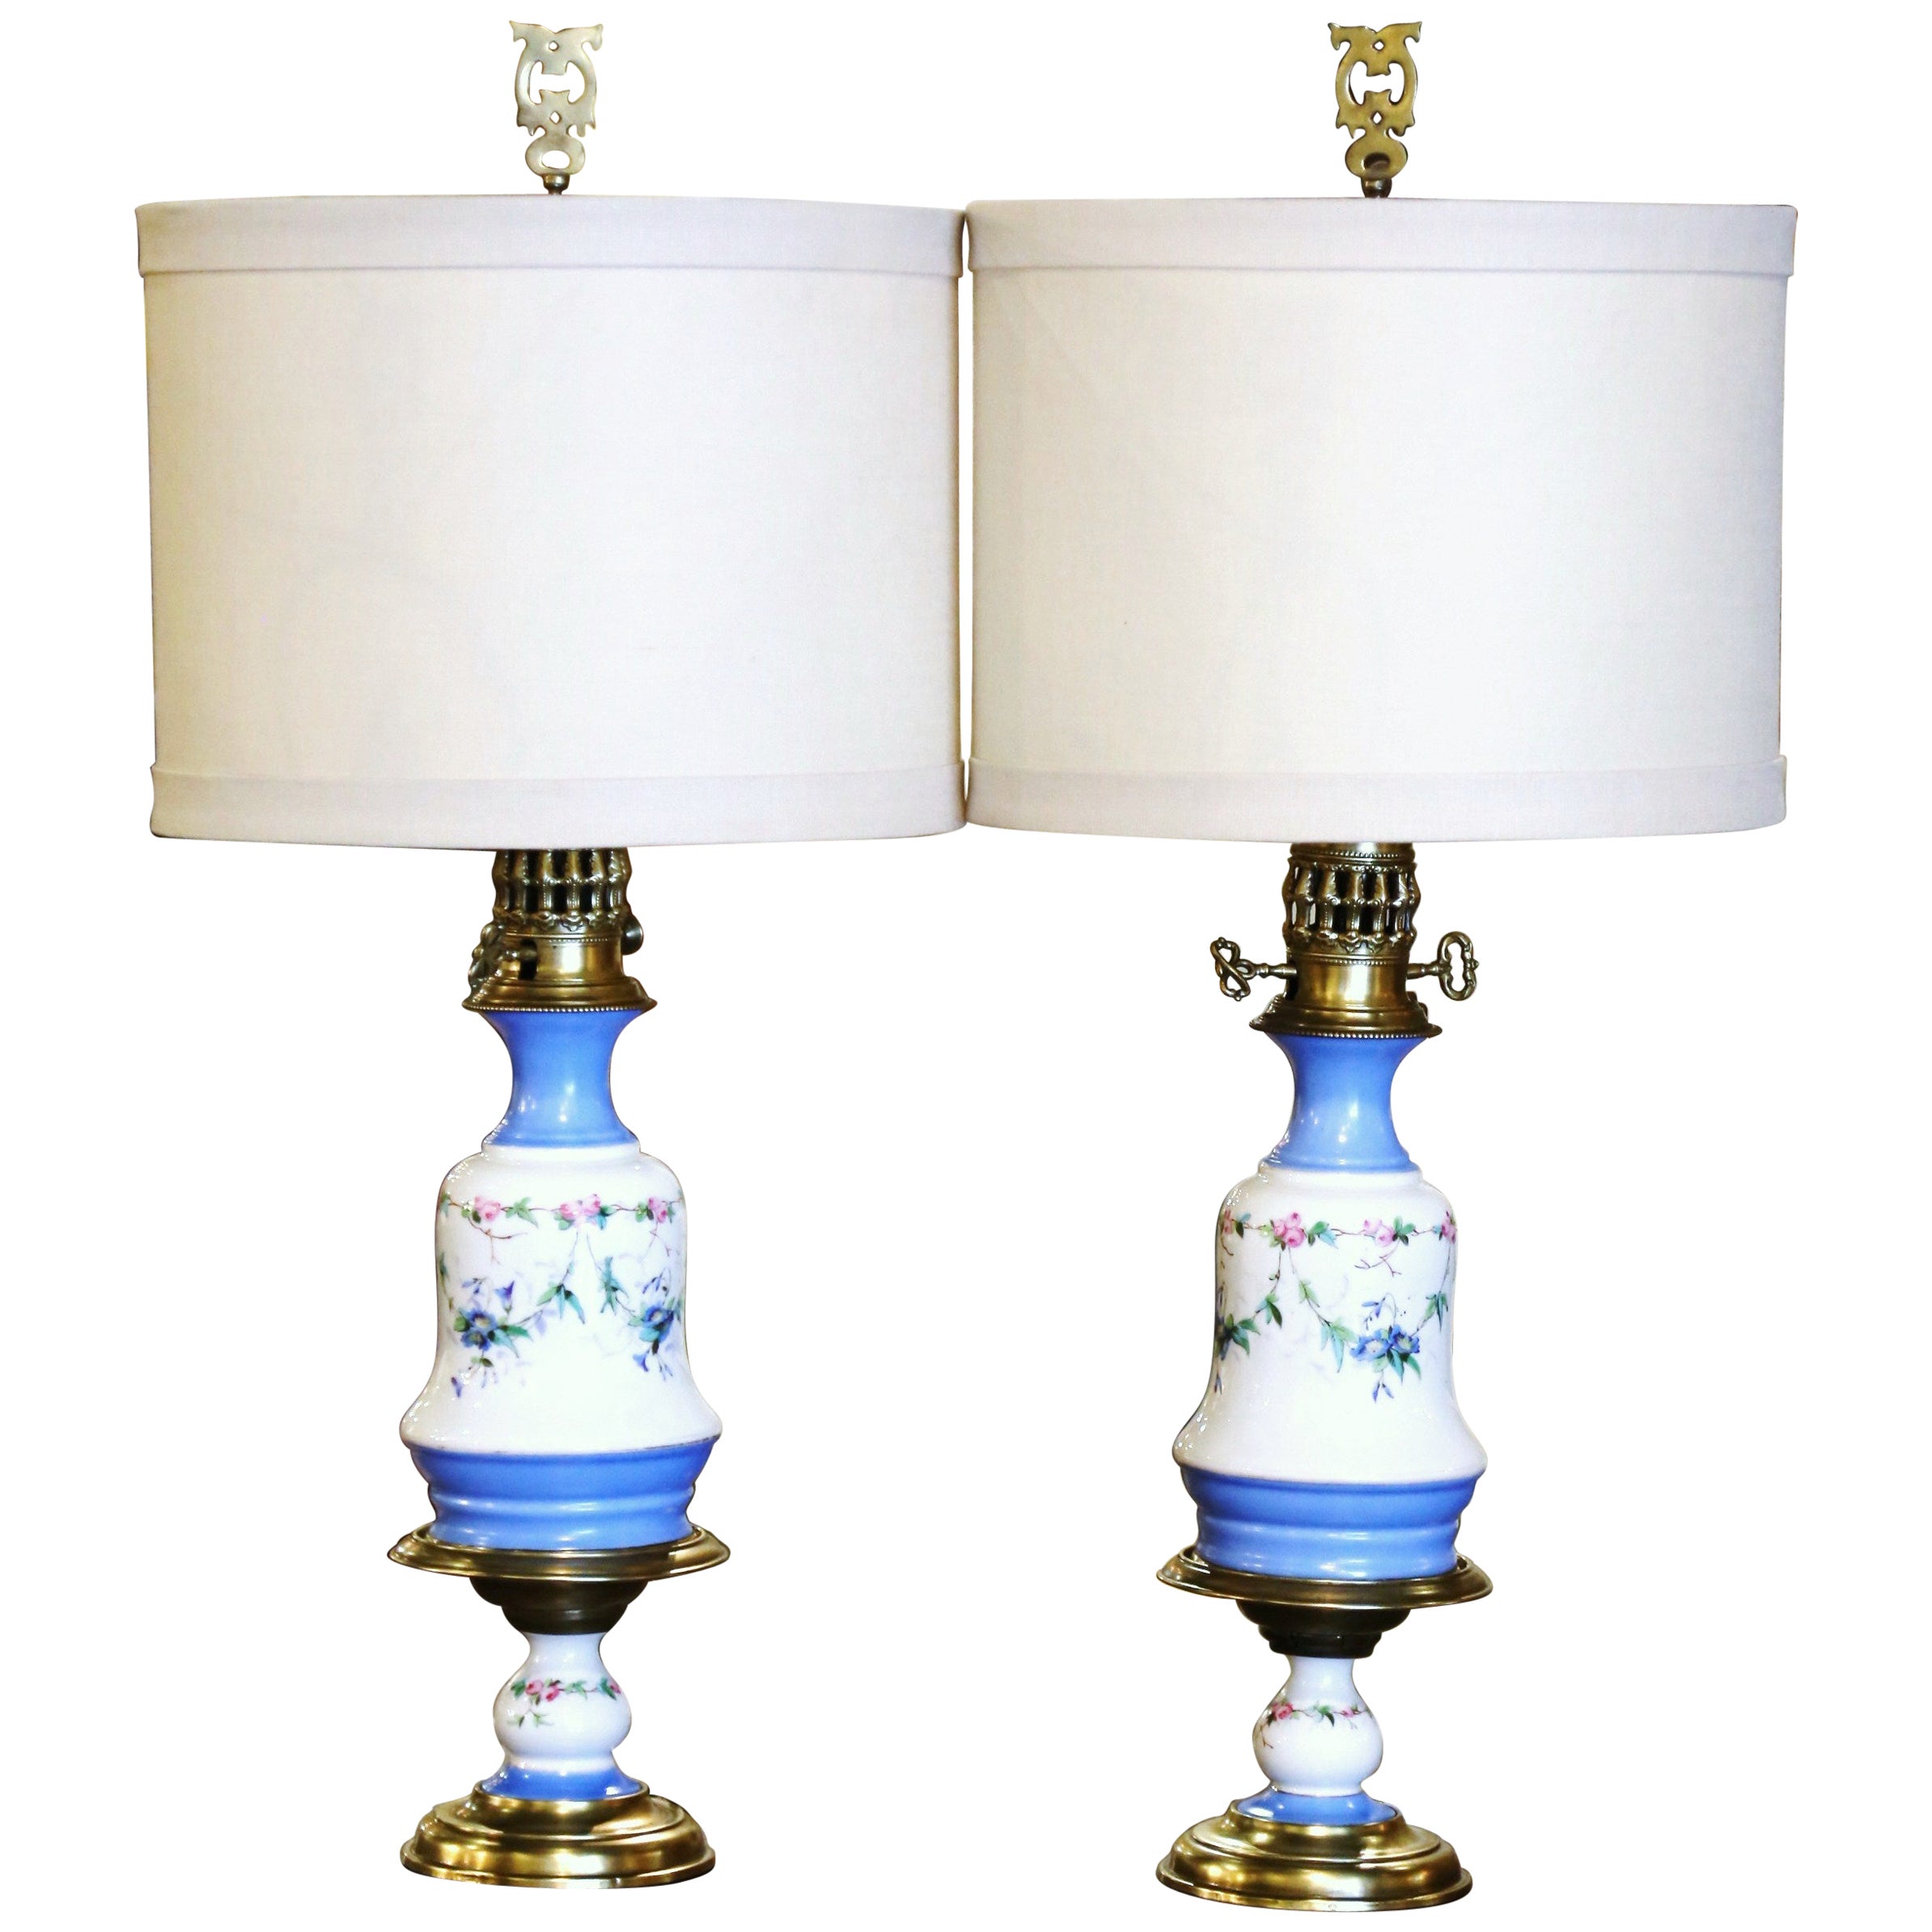 Pair of 19th Century French Porcelain & Brass Table Oil Lamps with Floral Motif For Sale